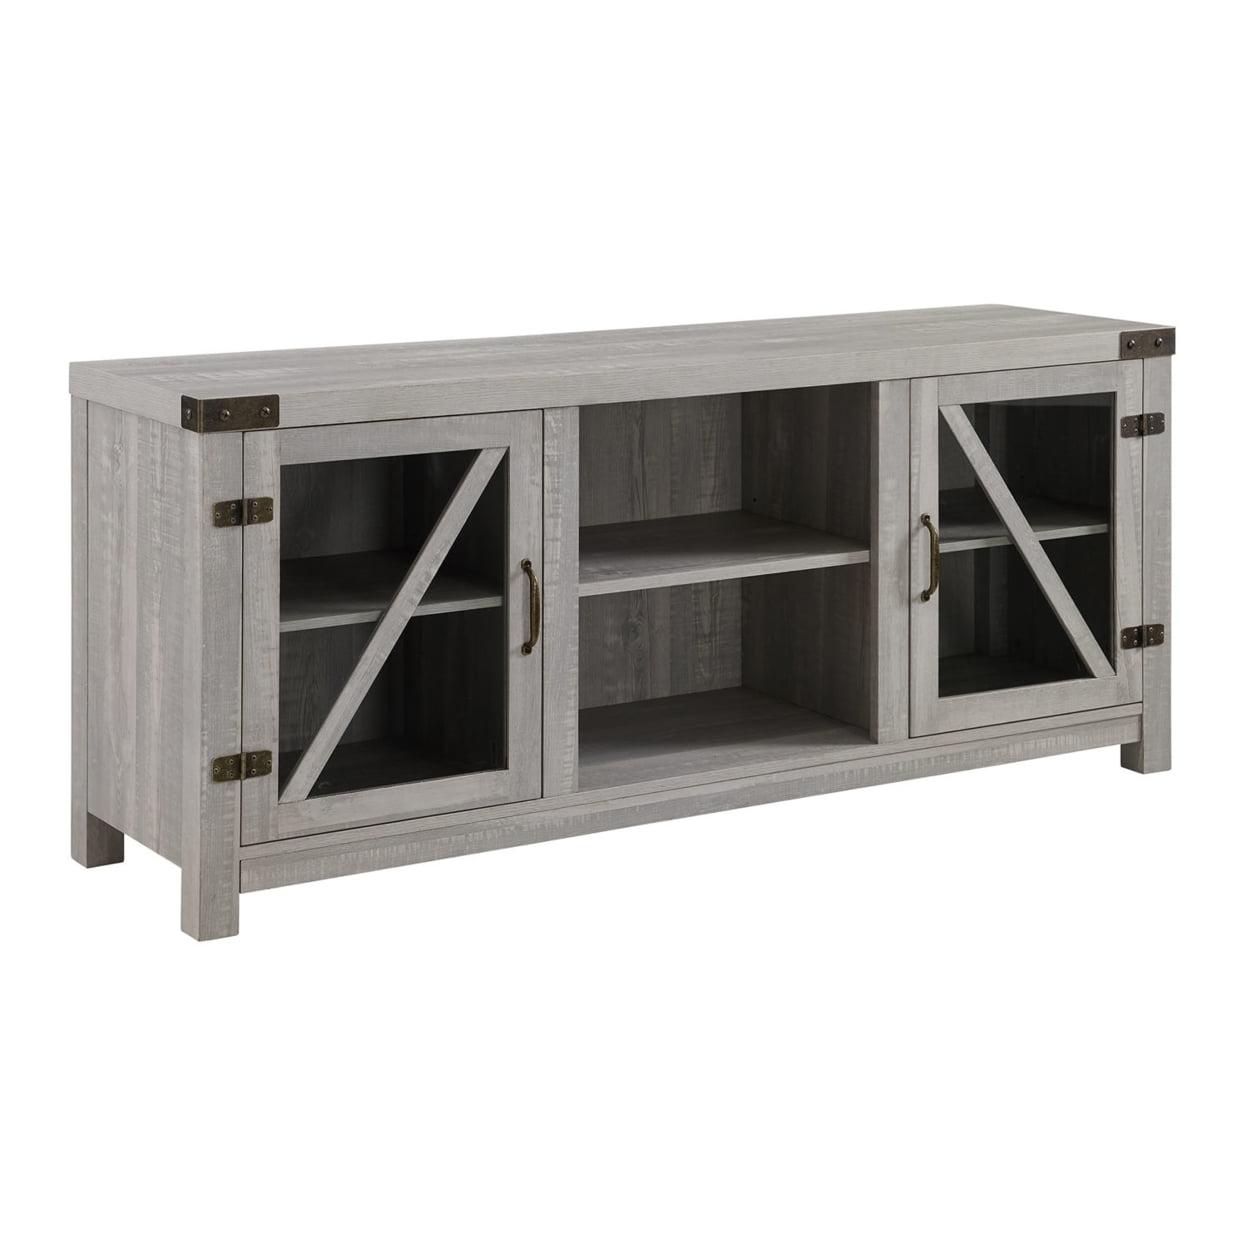 Stone Grey 58" Rustic Farmhouse TV Stand with Glass Doors